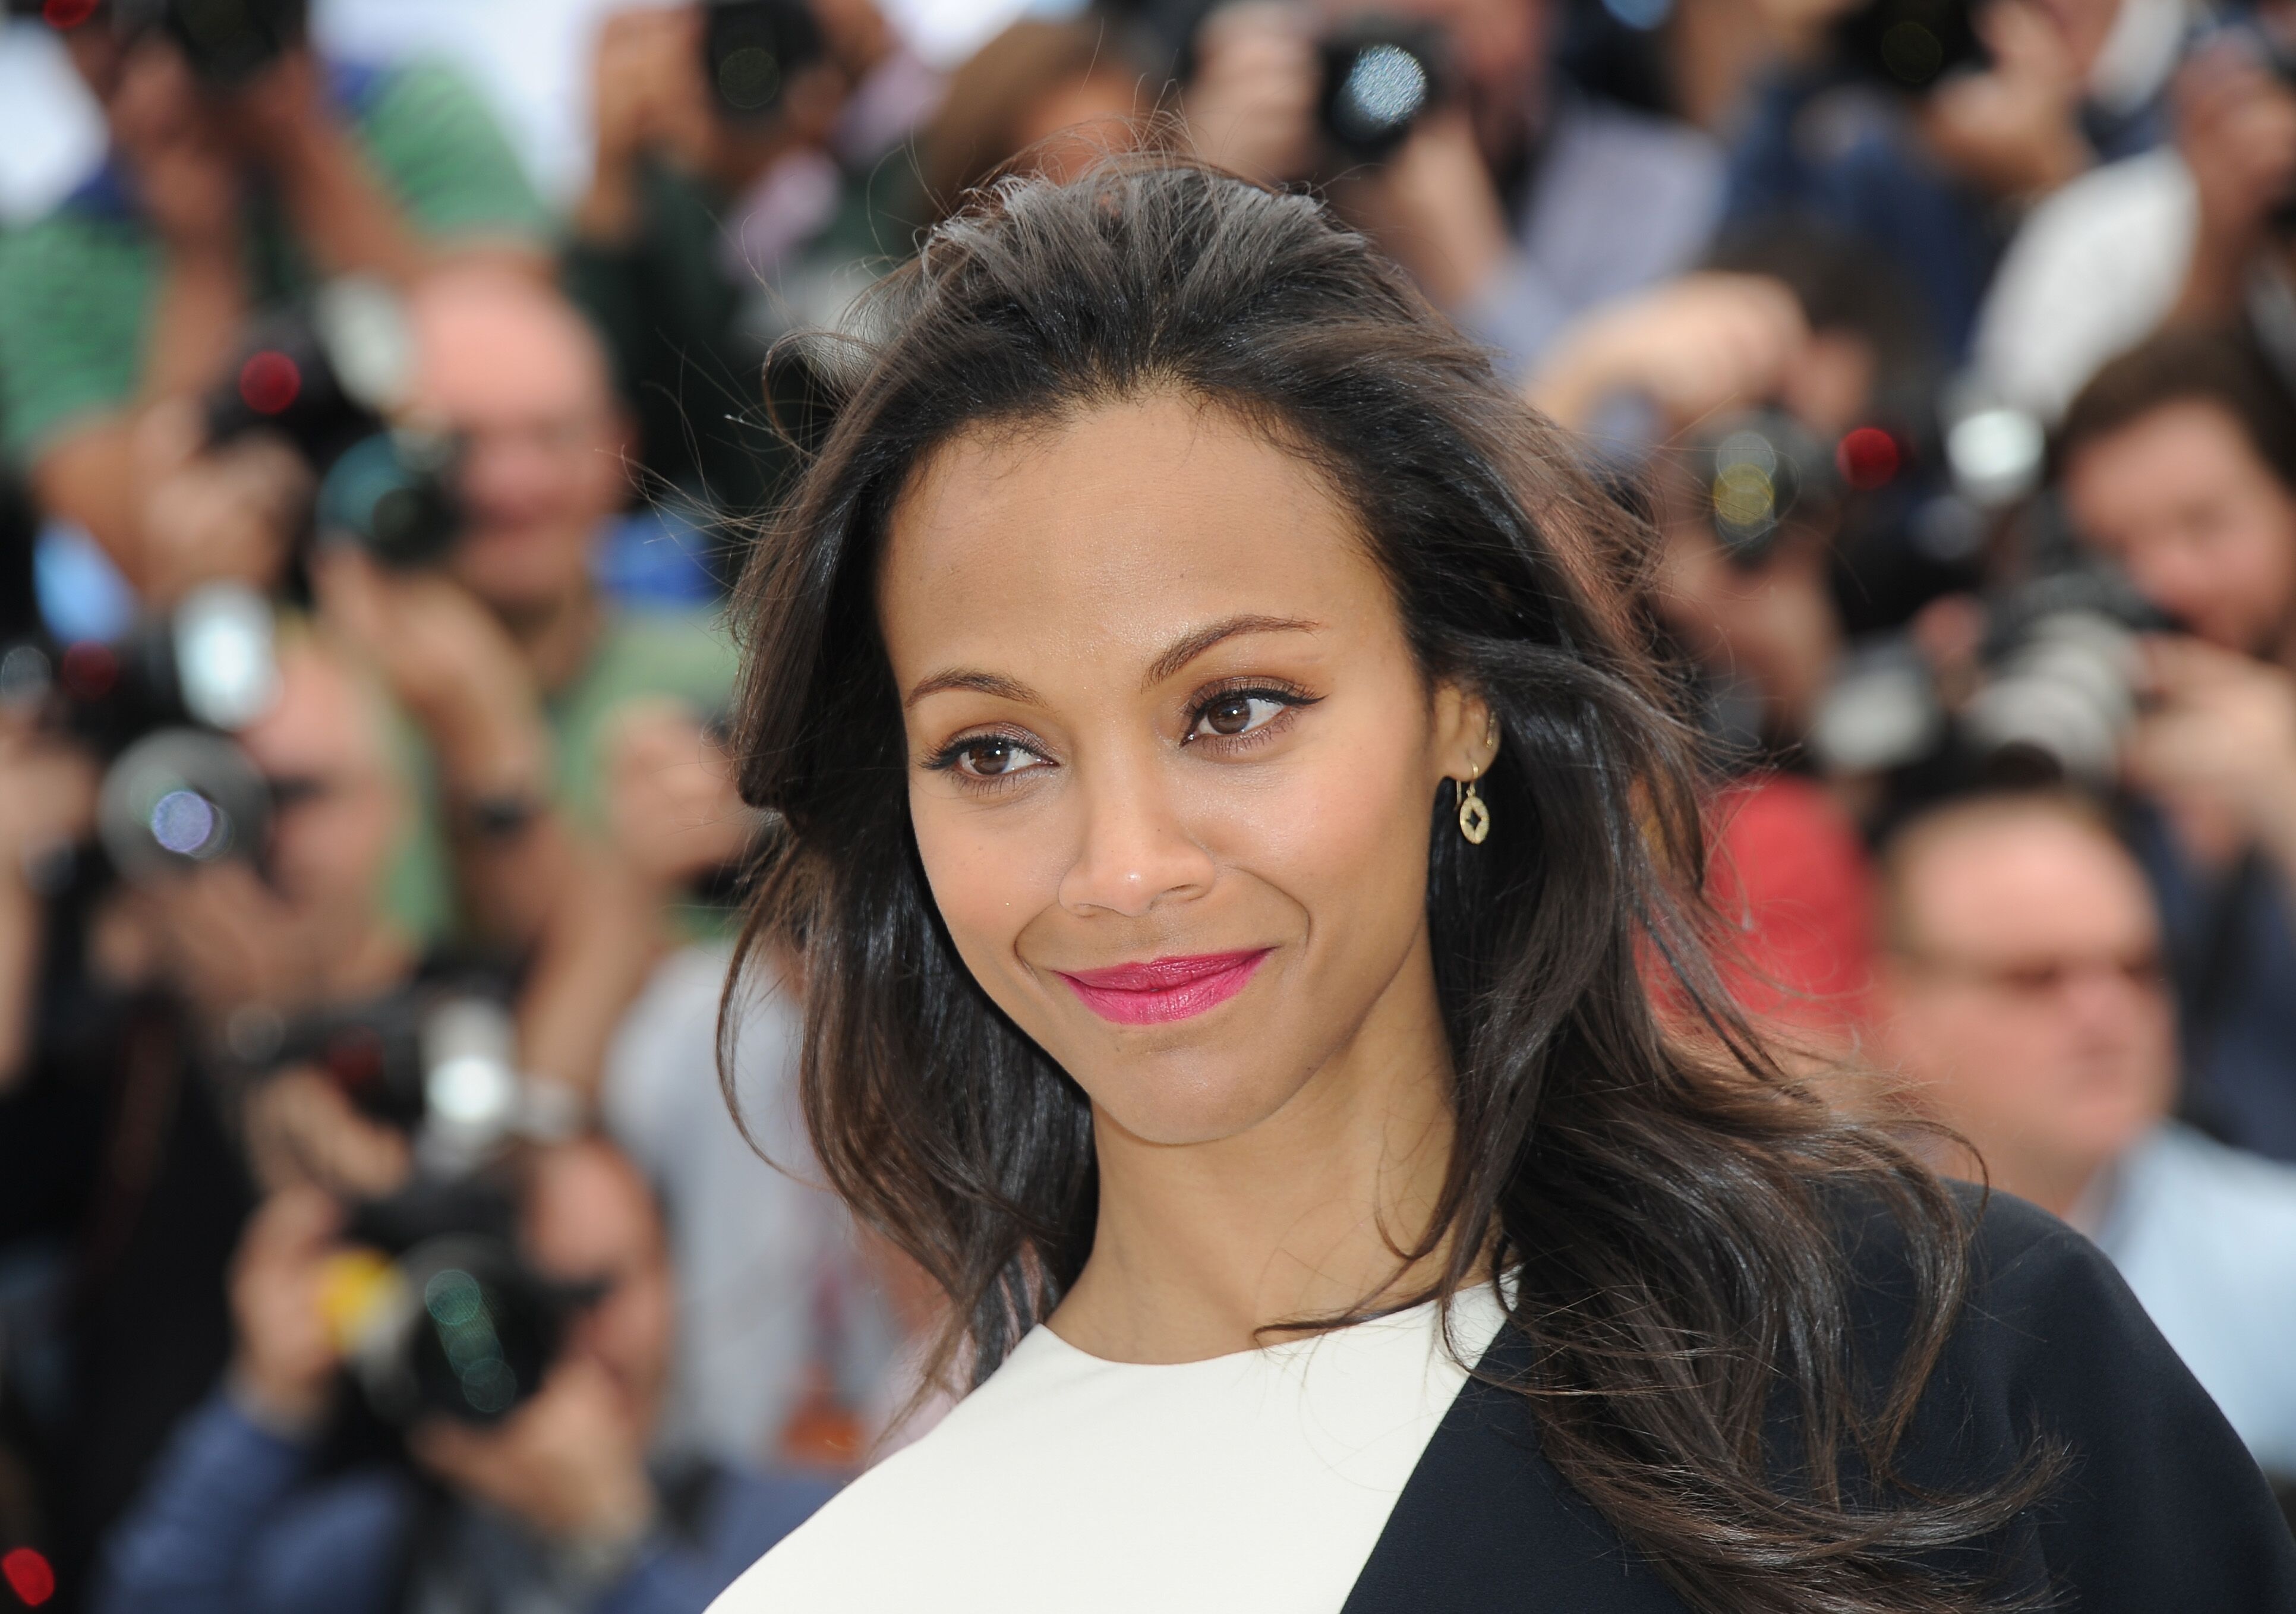 Actress Zoe Saldana attends the photocall for 'Blood Ties' at The 66th Annual Cannes Film Festival on May 20, 2013 in Cannes, France. | Photo: Getty Images